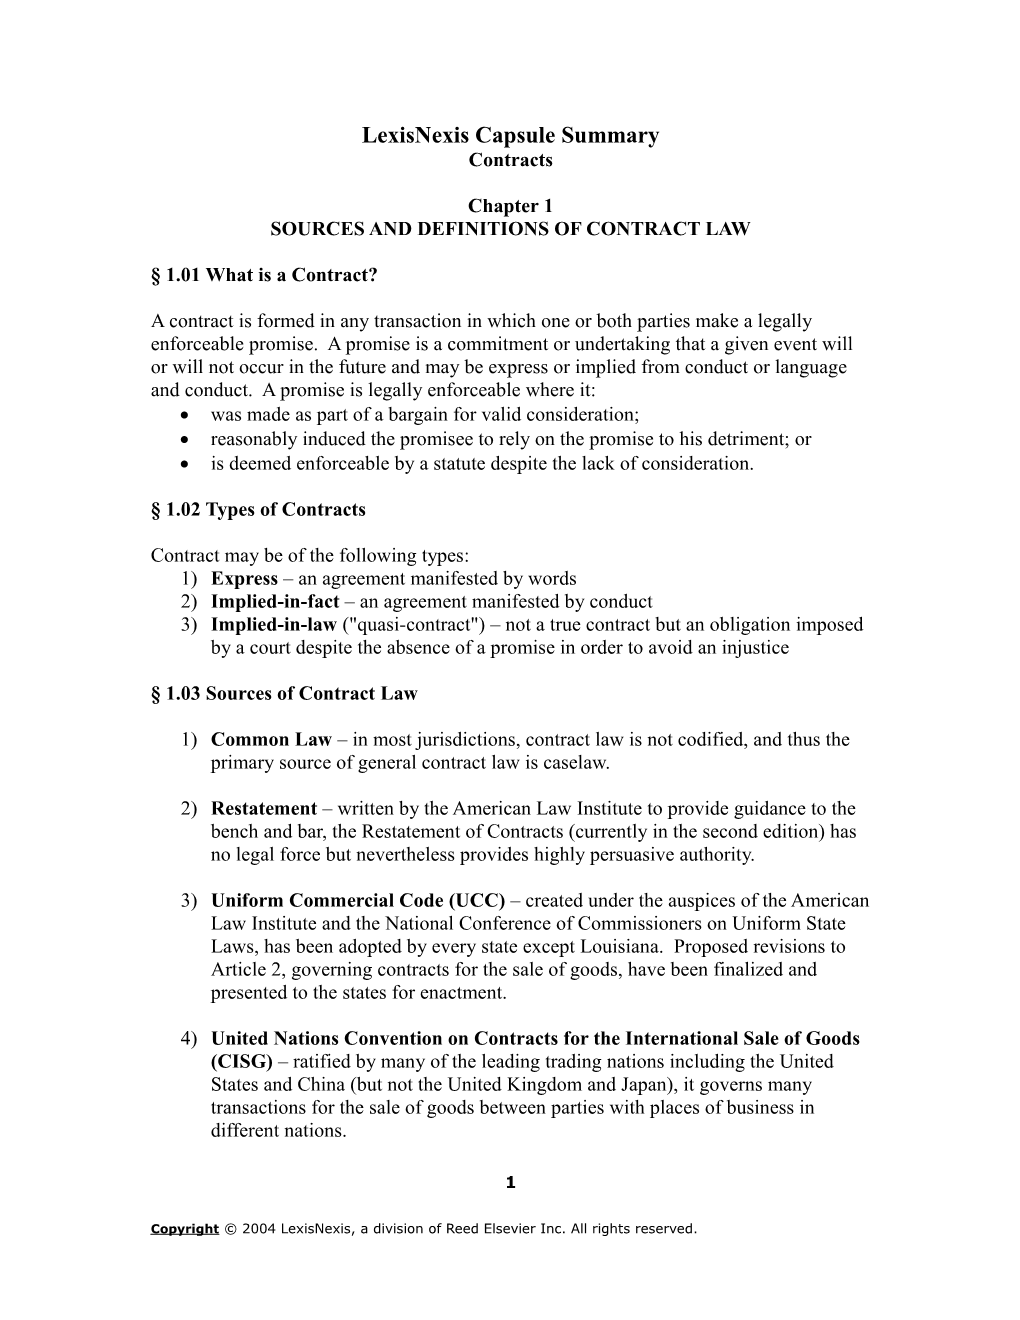 Contracts Area of Law Summary